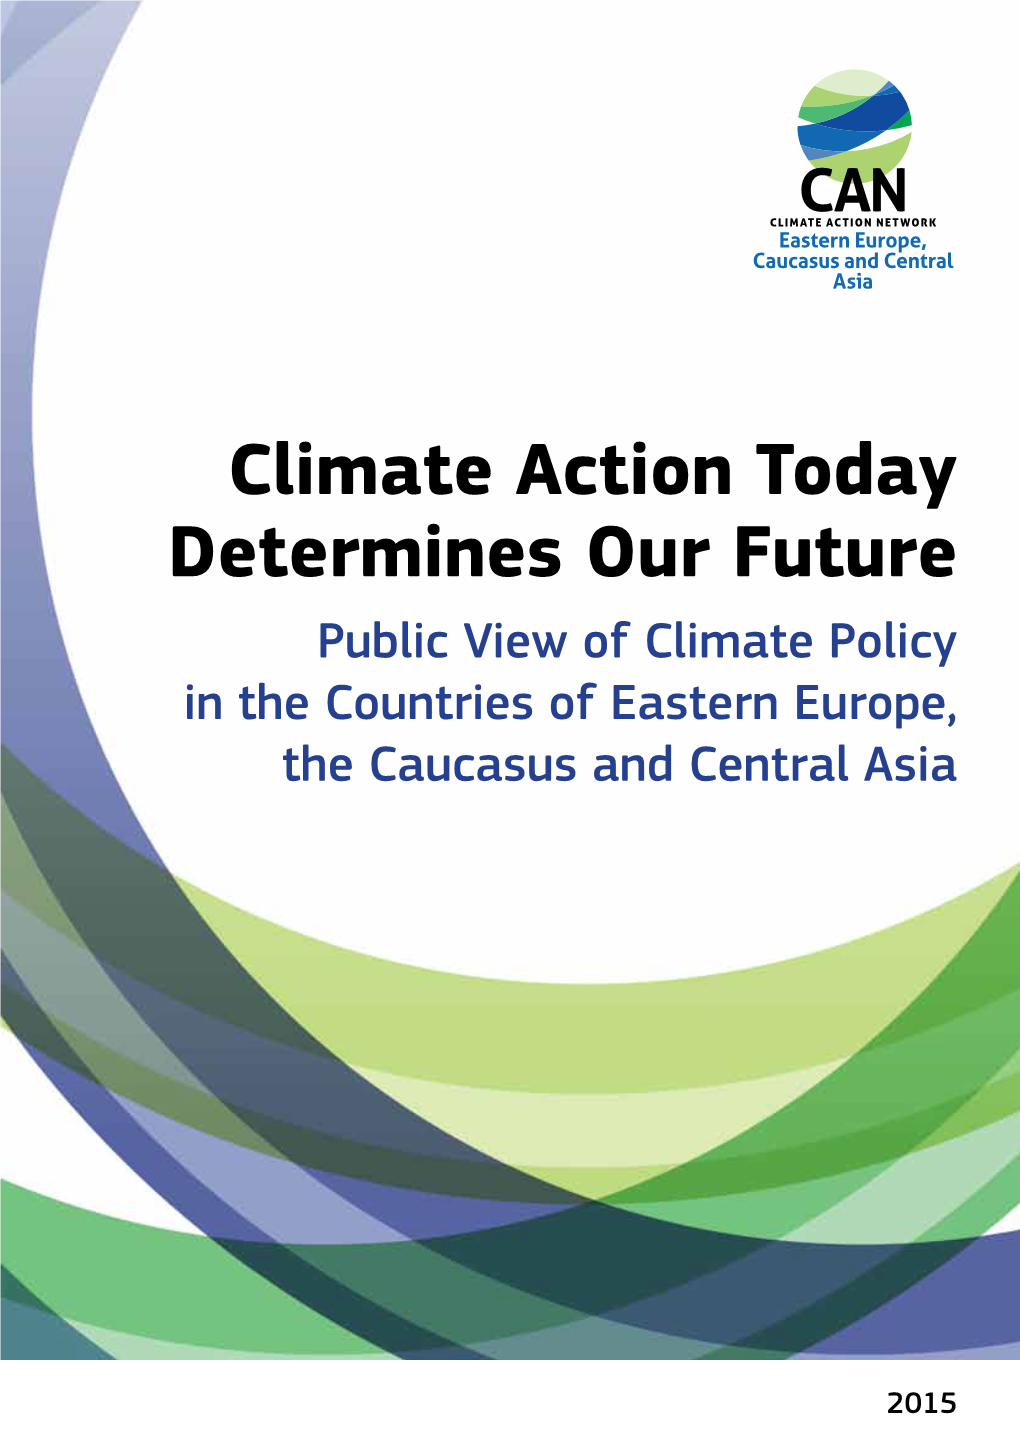 Climate Action Today Determines Our Future Public View of Climate Policy in the Countries of Eastern Europe, the Caucasus and Central Asia